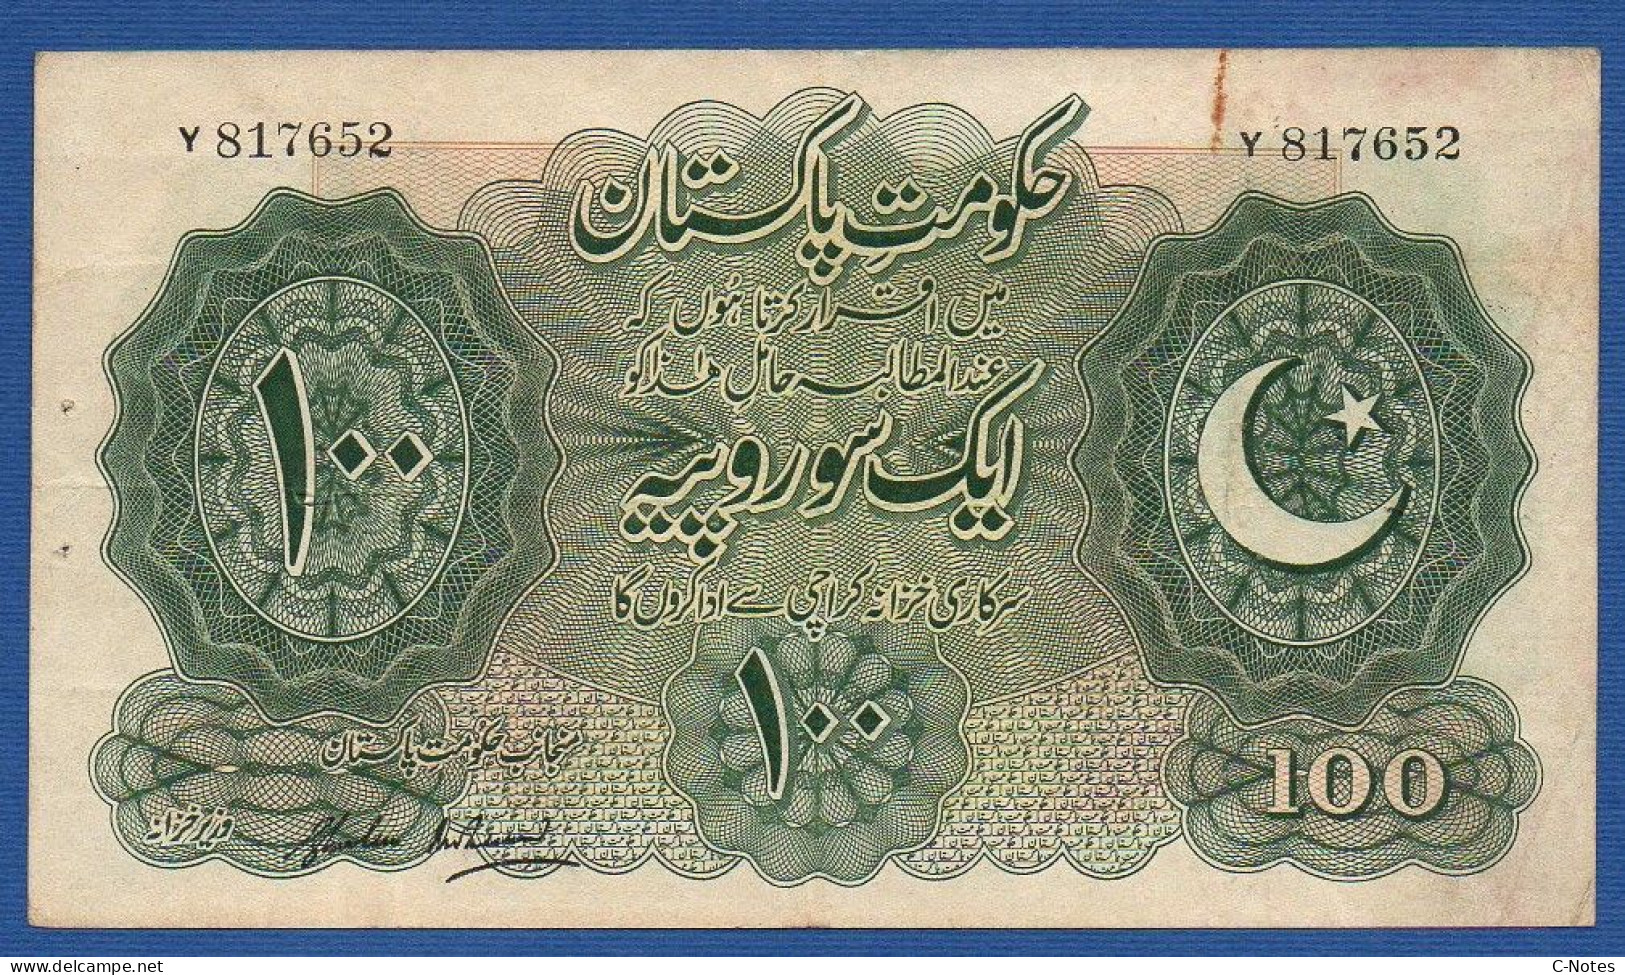 PAKISTAN - P. 7 – 100 Rupees ND (1948) F/VF, S/n Y817652  "Arms" Issue - Pakistan